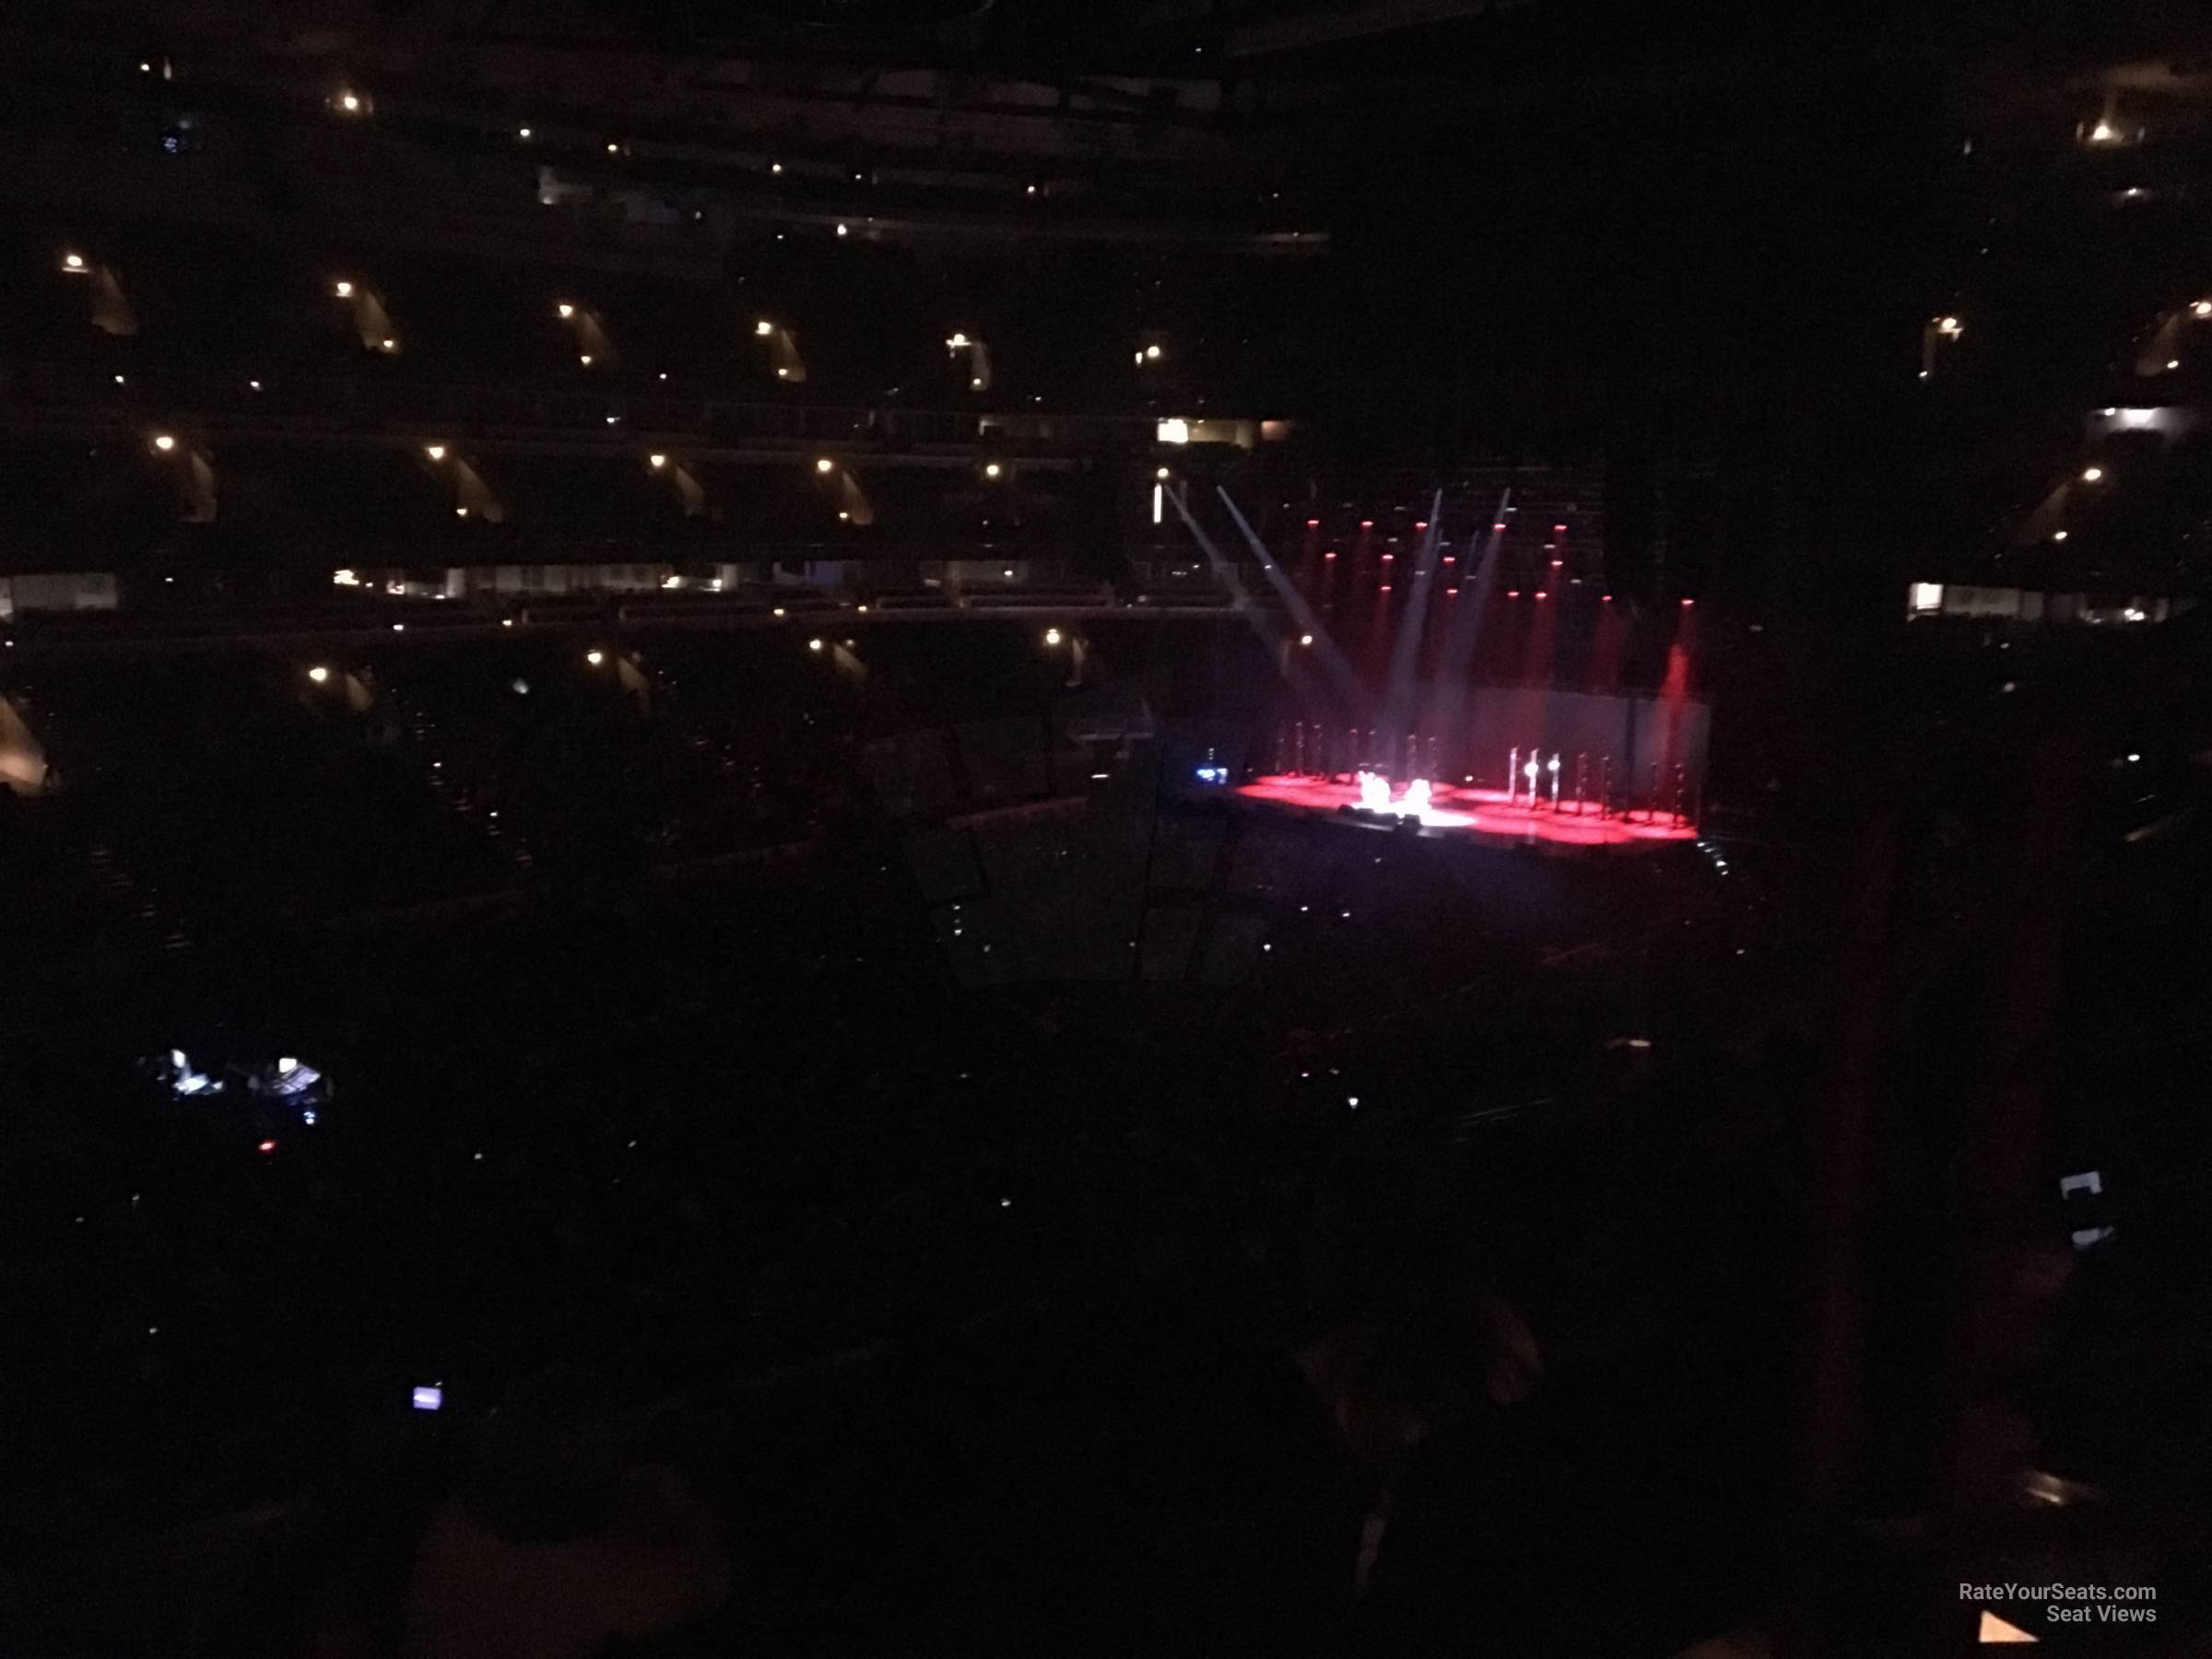 section 203, row 4 seat view  for concert - united center